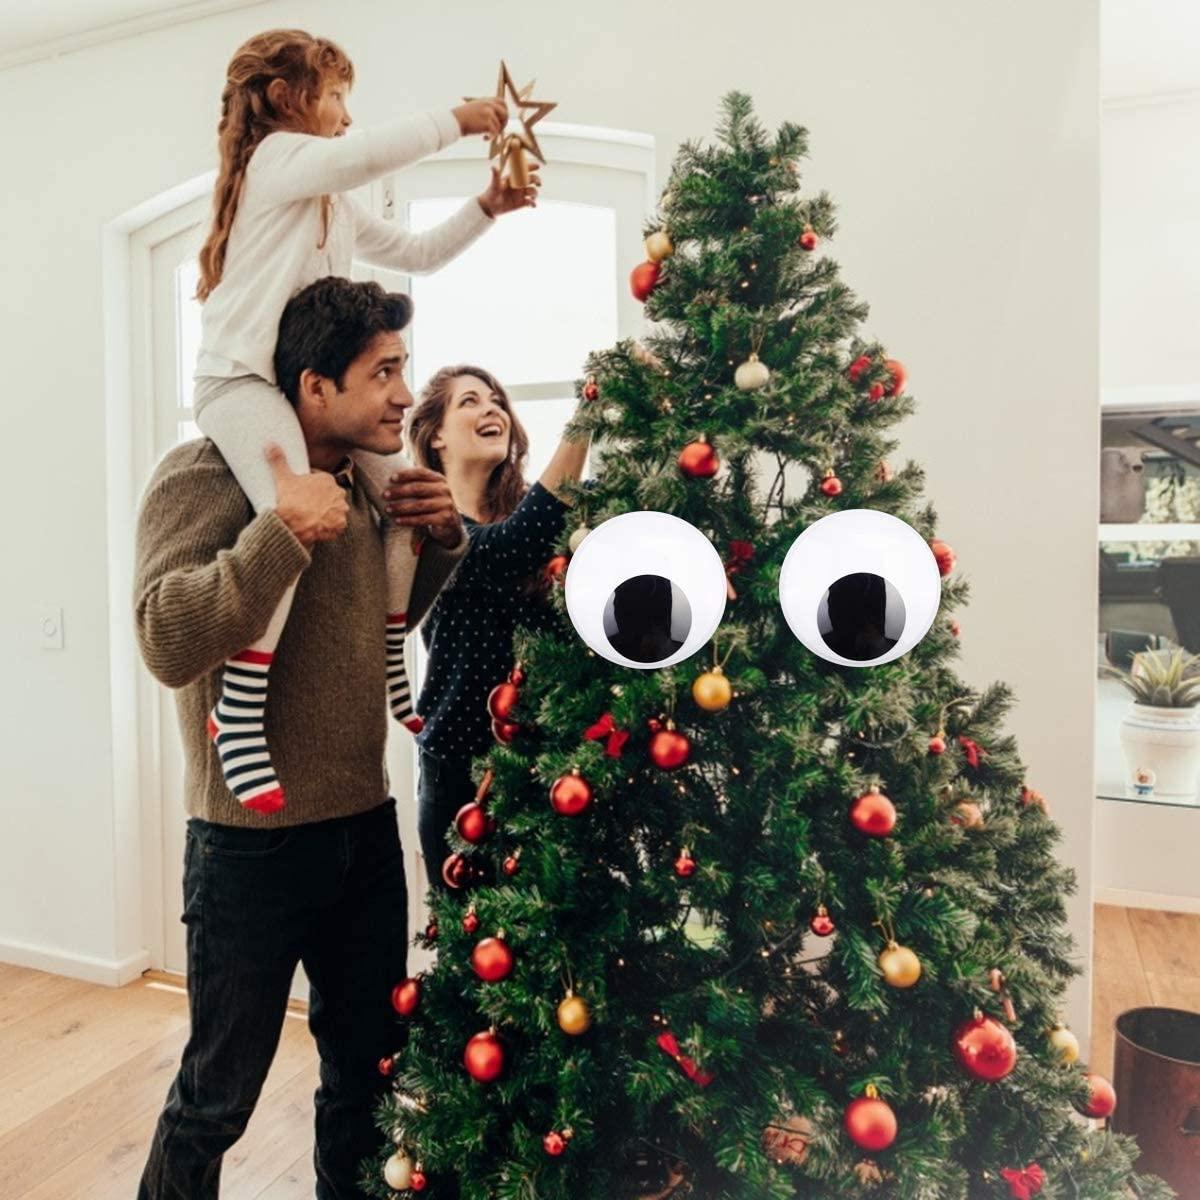 7inch Giant Googly Eyes Plastic Wiggle Eyes With Self Adhesive For  Chritsmas Tree Party Tions 2 Pieces